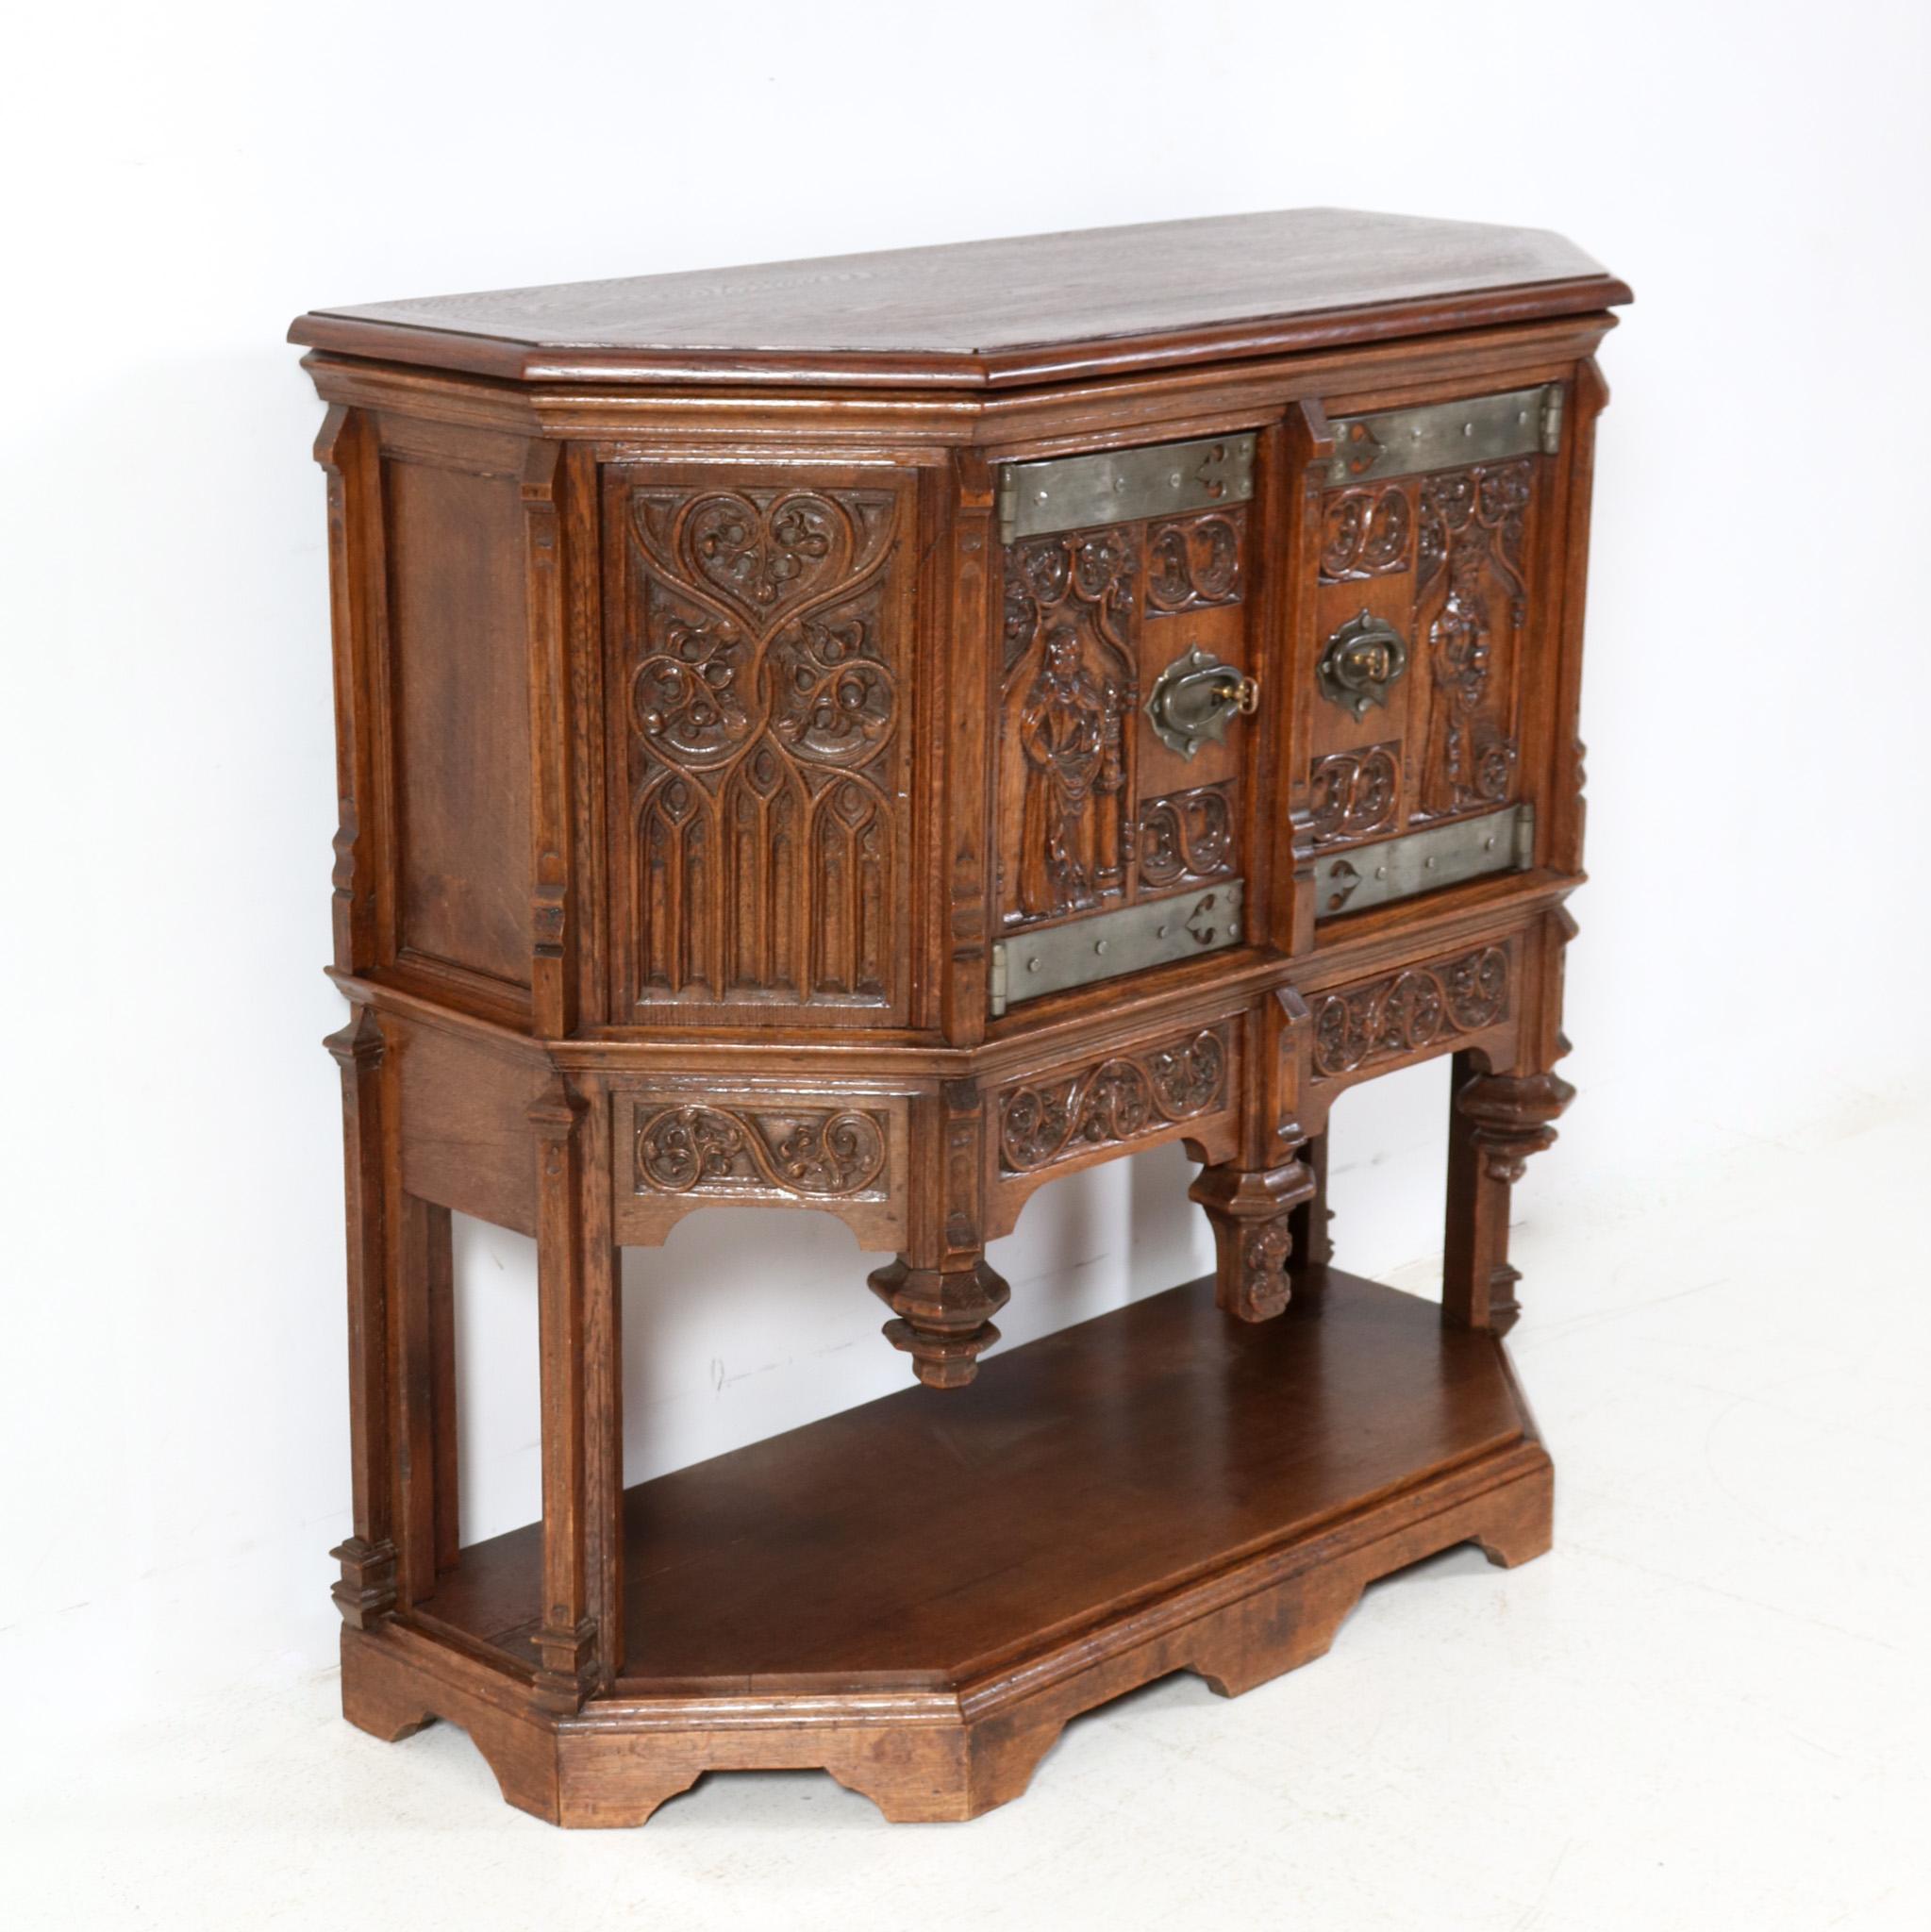 Stunning and rare Gothic Revival credenza.
Striking Dutch design from the 1930s.
Solid oak with original hand-carved decorative panels.
Original wrought iron handles and hinges.
The top of solid oak  has been refinished.
Two original drawers with